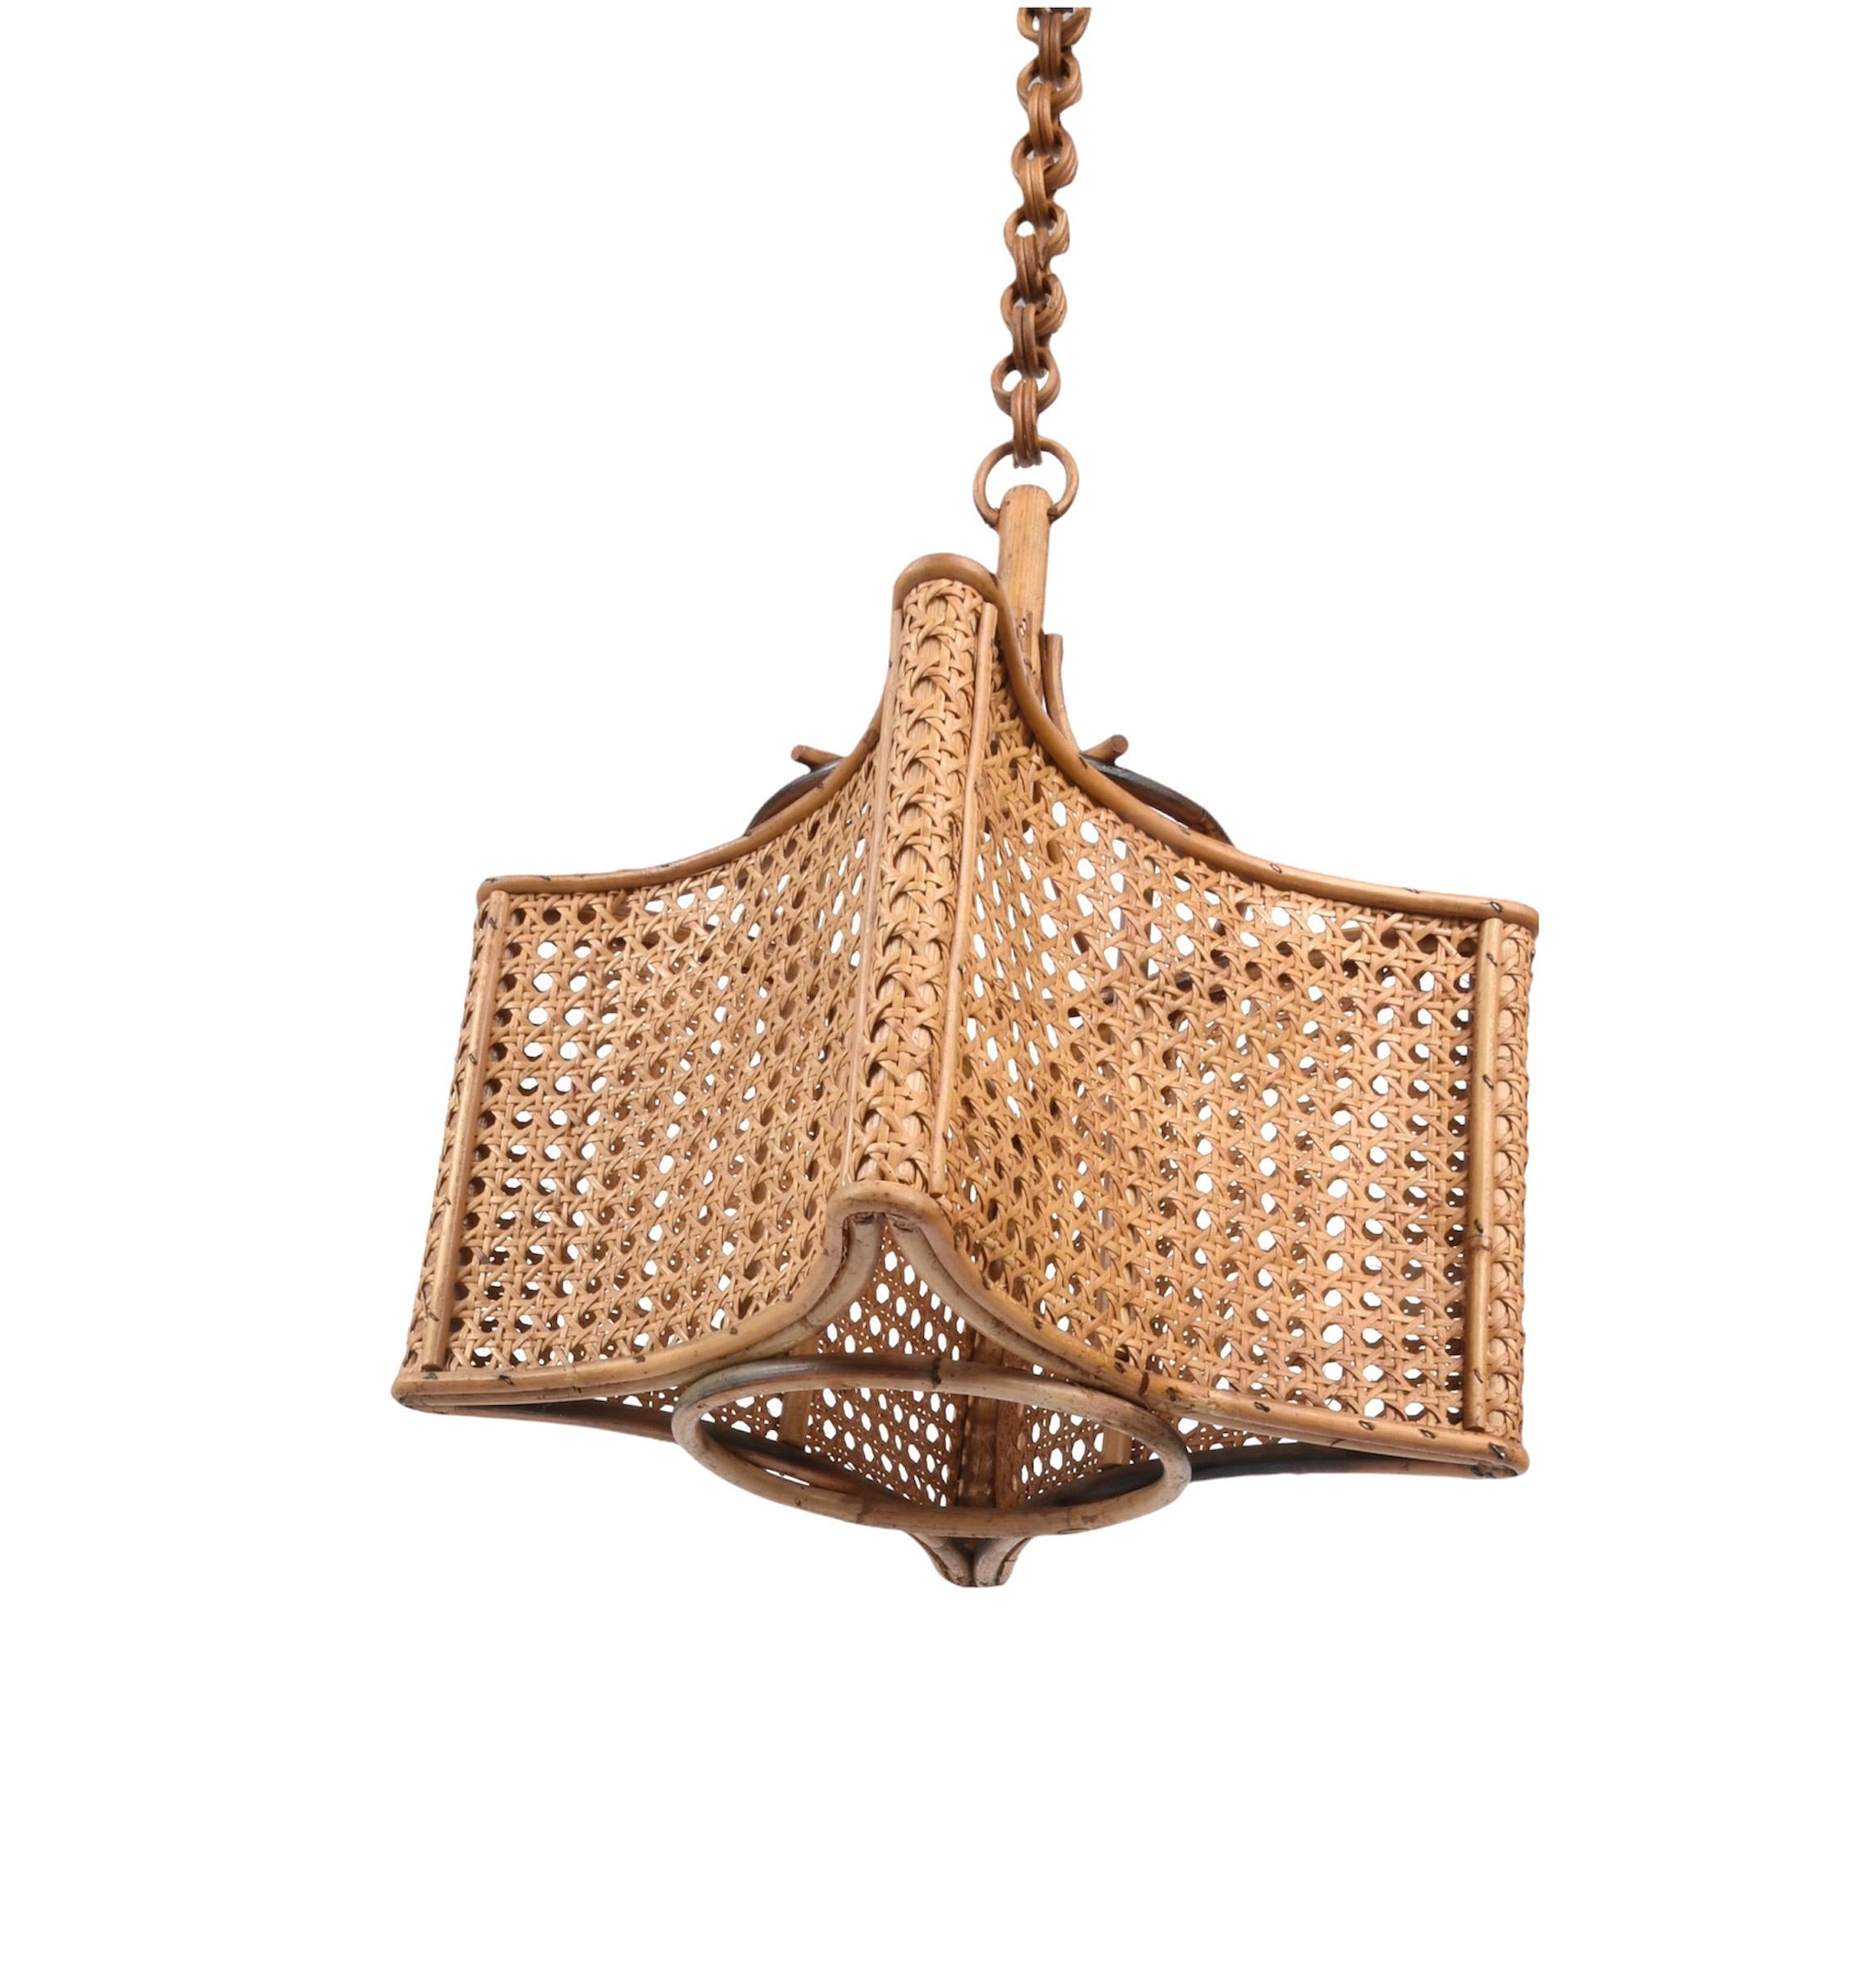 20th Century Midcentury French Riviera Bambo and Rattan Square Italian Chandelier, 1960s